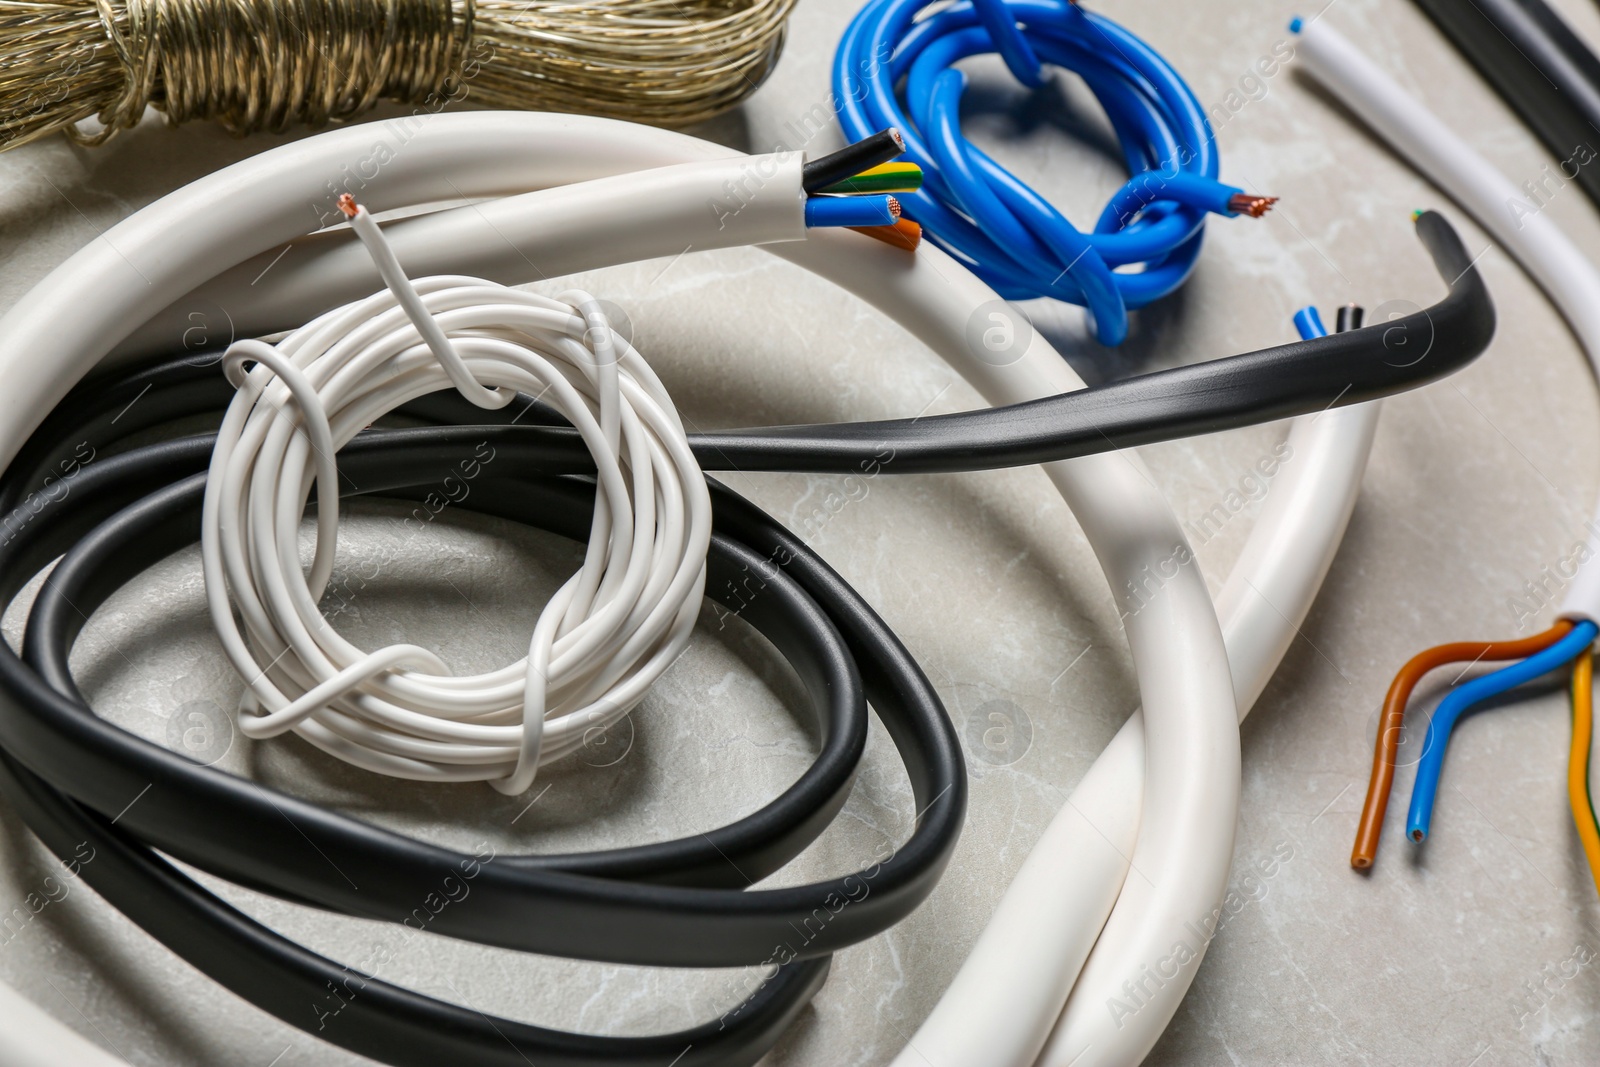 Photo of Different electrical wires on light grey table, closeup